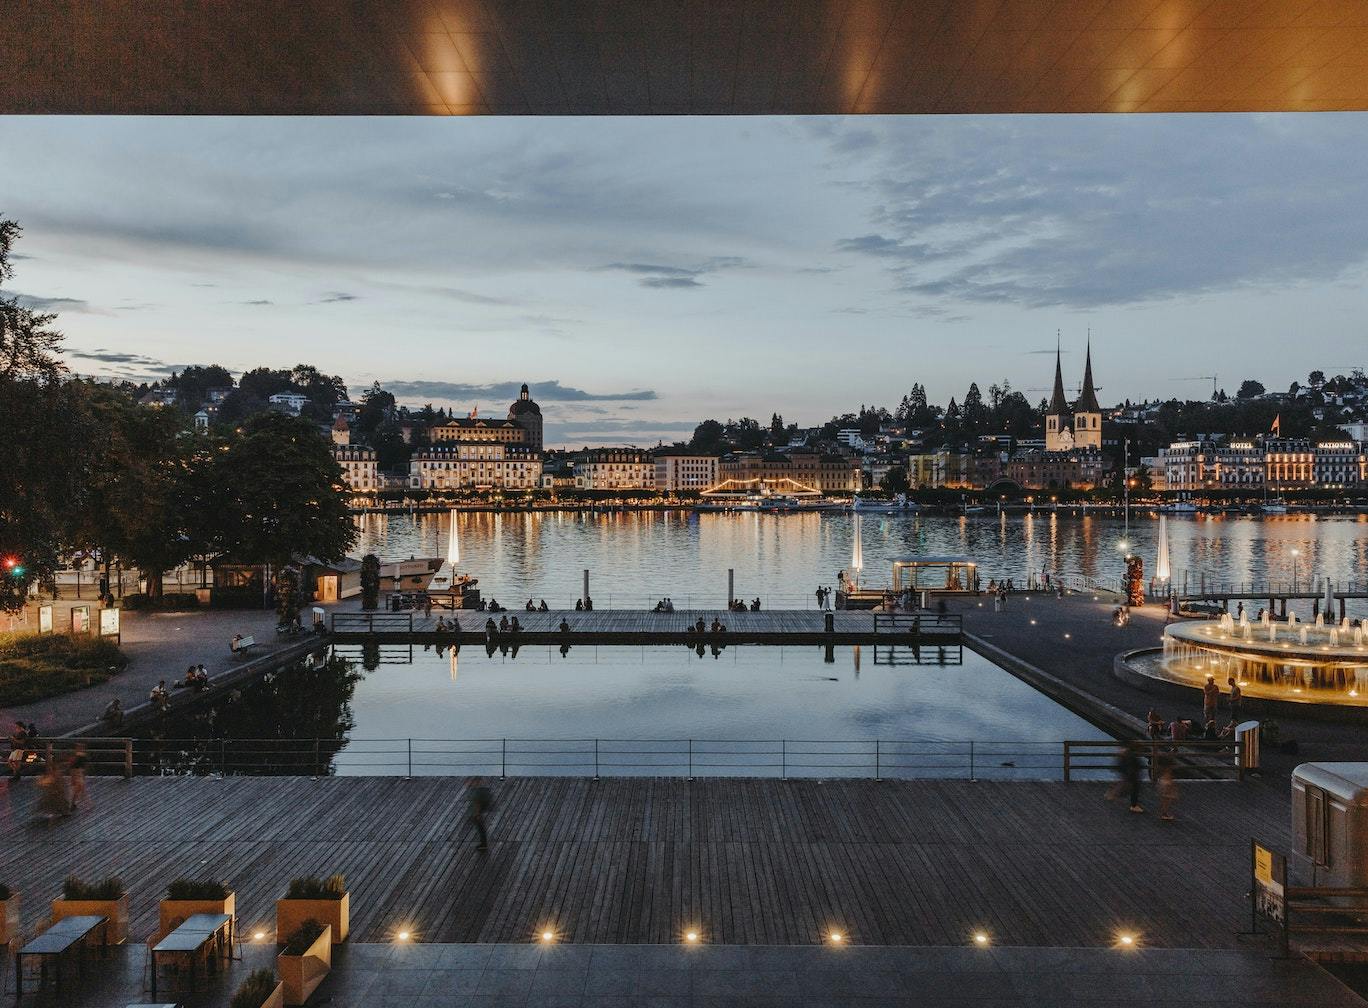 The Lucerne Terrace at the KKL Lucerne with a view of Lucerne in the evening